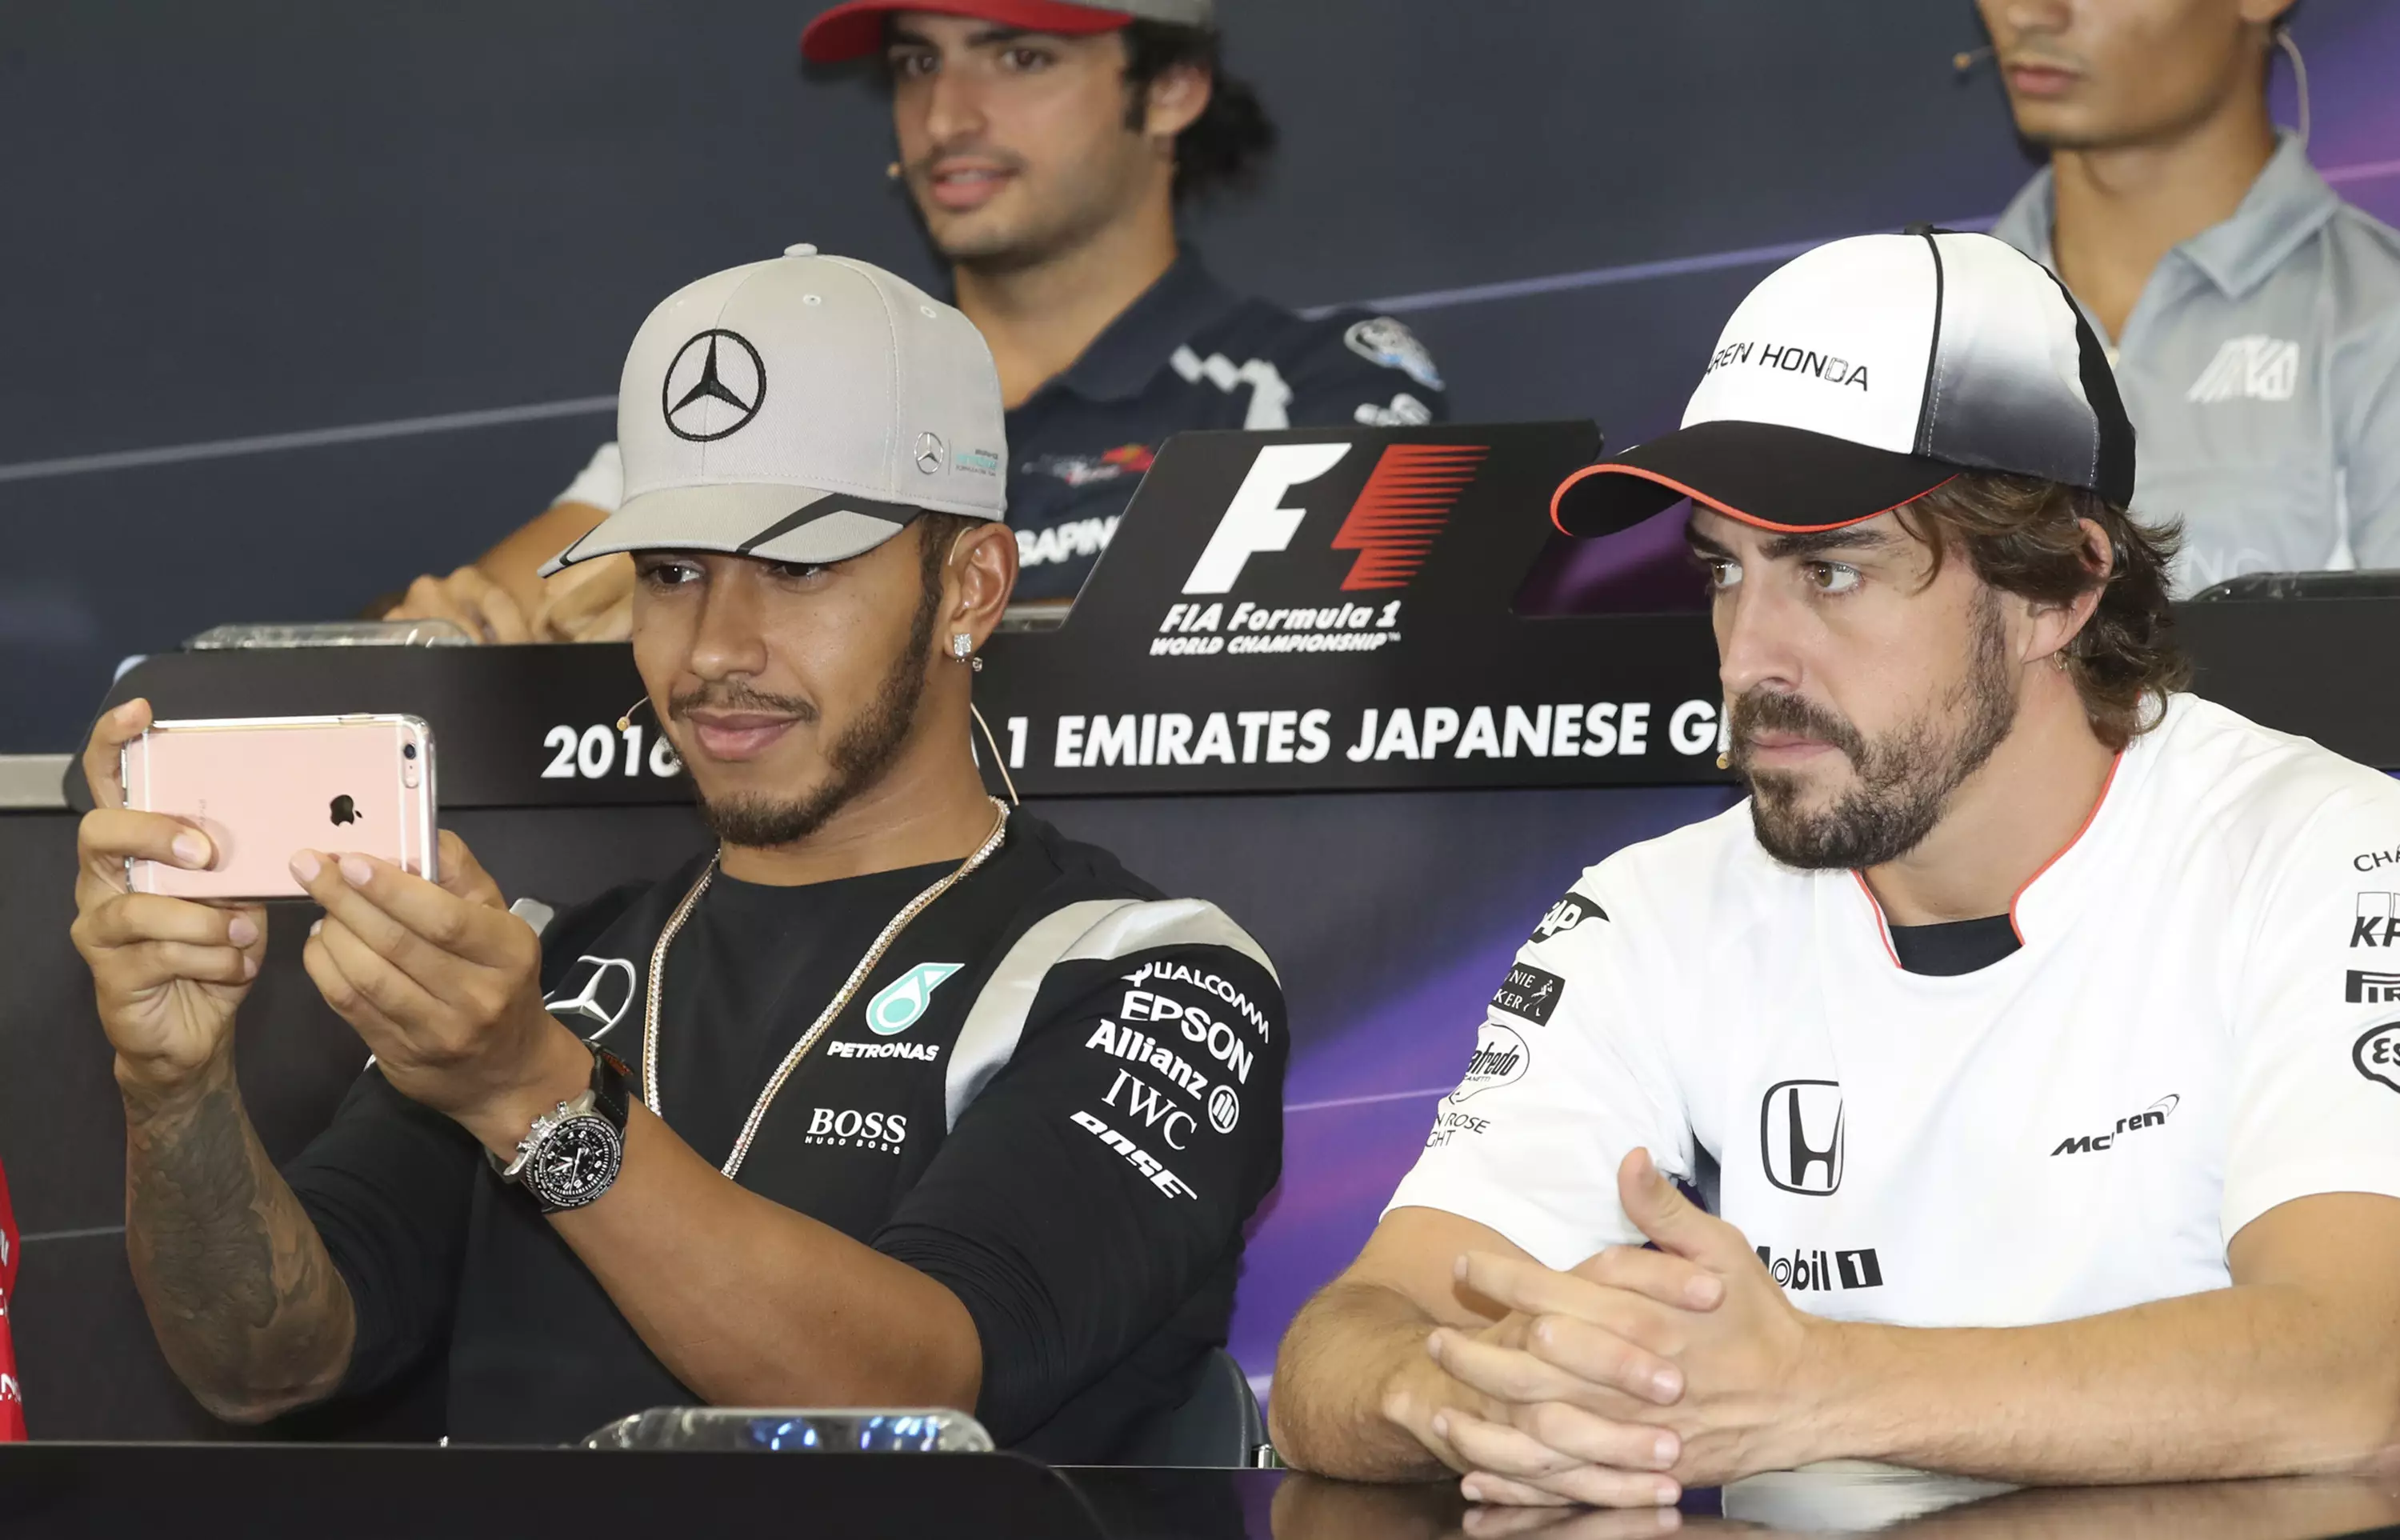 Lewis Hamilton Causes 'Outrage' By Having Snapchat Fun During Press Conference